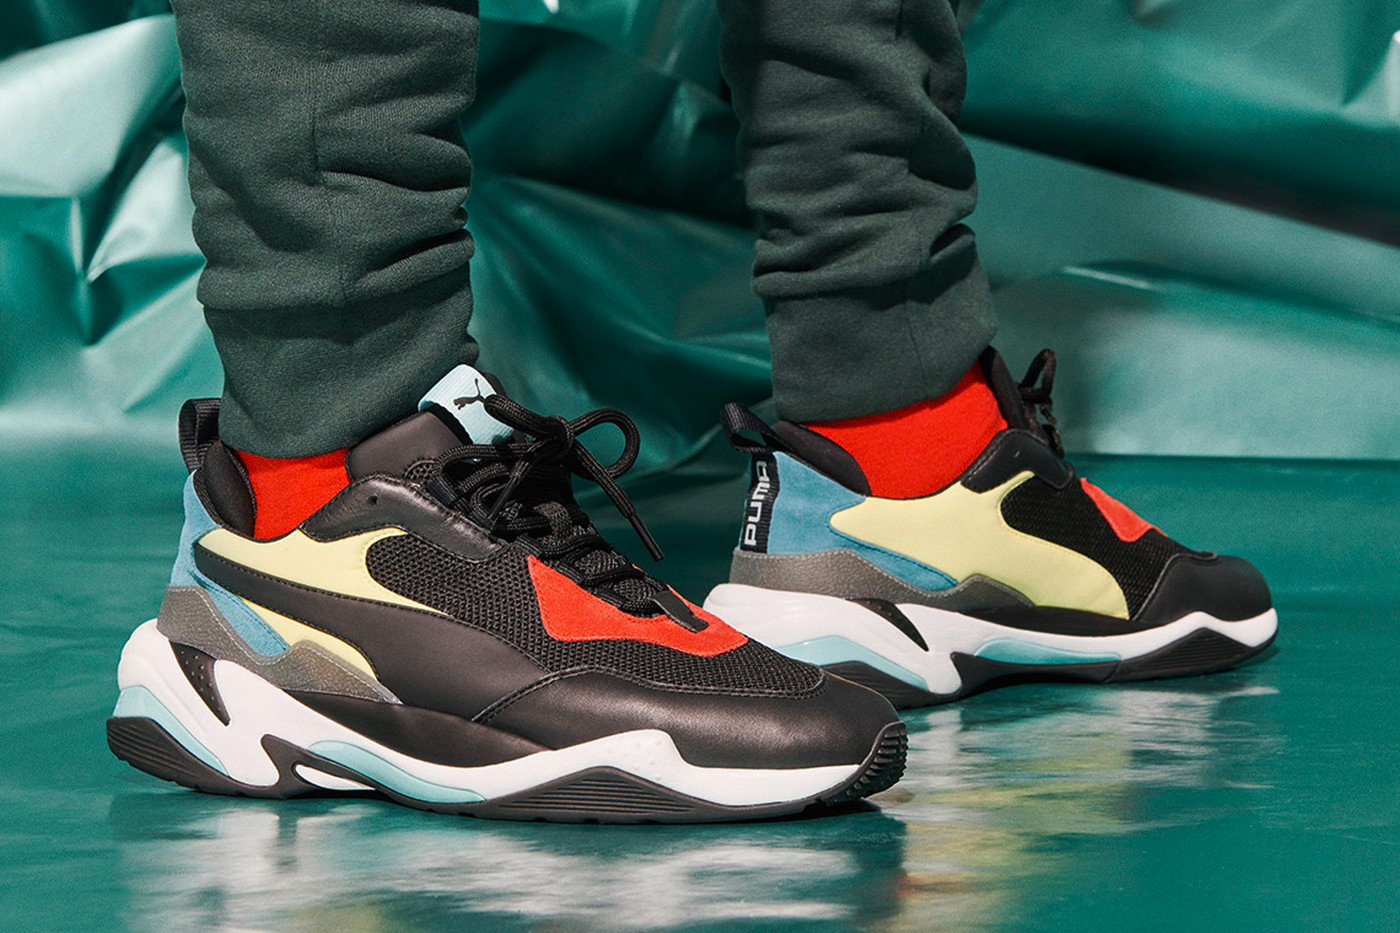 PUMA Thunder Spectra Black Friday Restock Third Release Original Colorway Black Yellow Red Blue dad sneaker chunky trainer footwear big sole